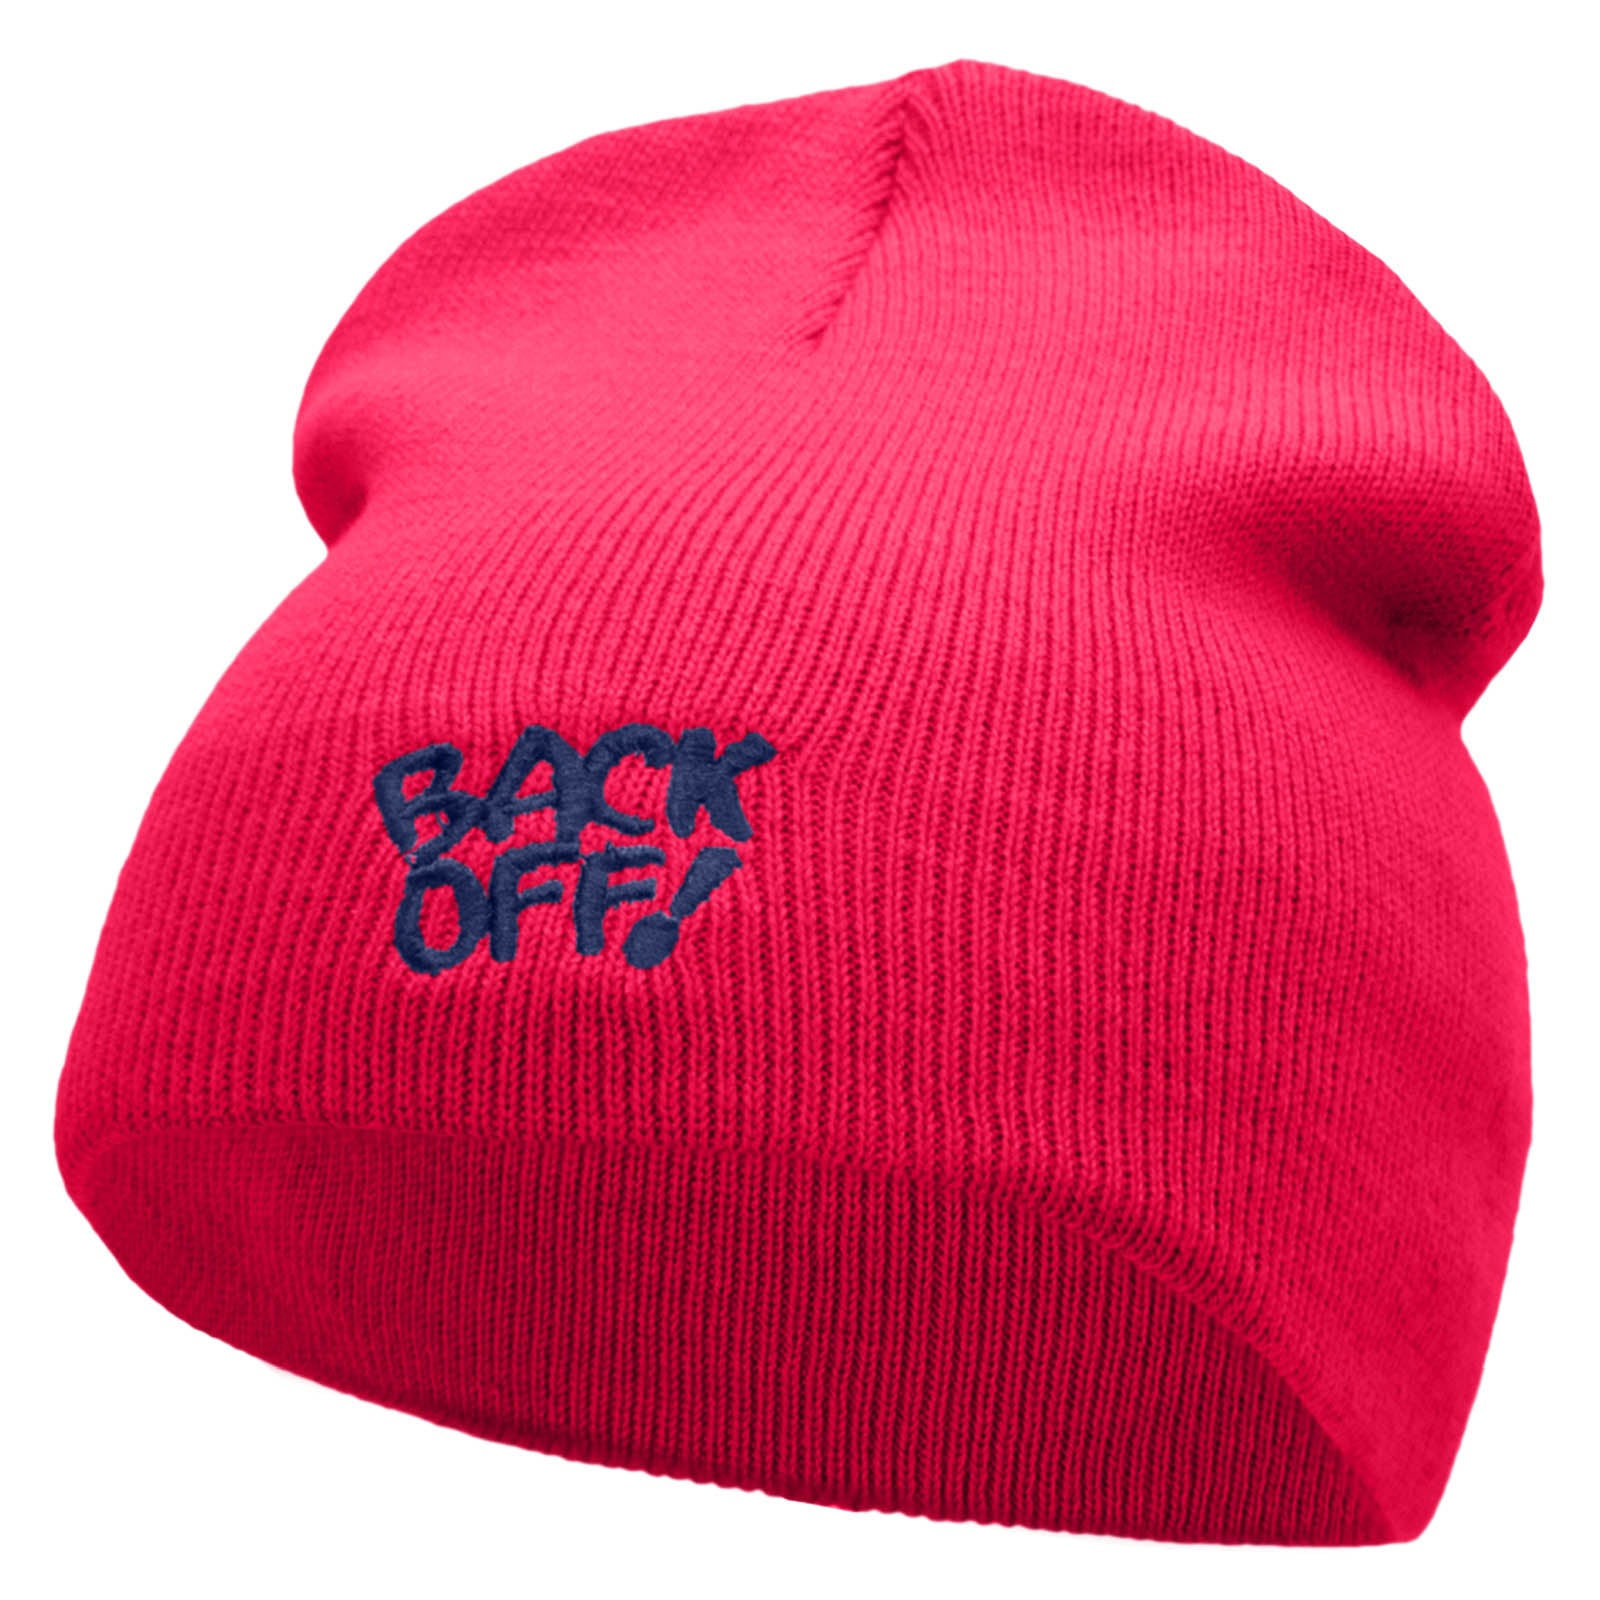 Back Off Saying Embroidered Short Beanie - Magenta OSFM